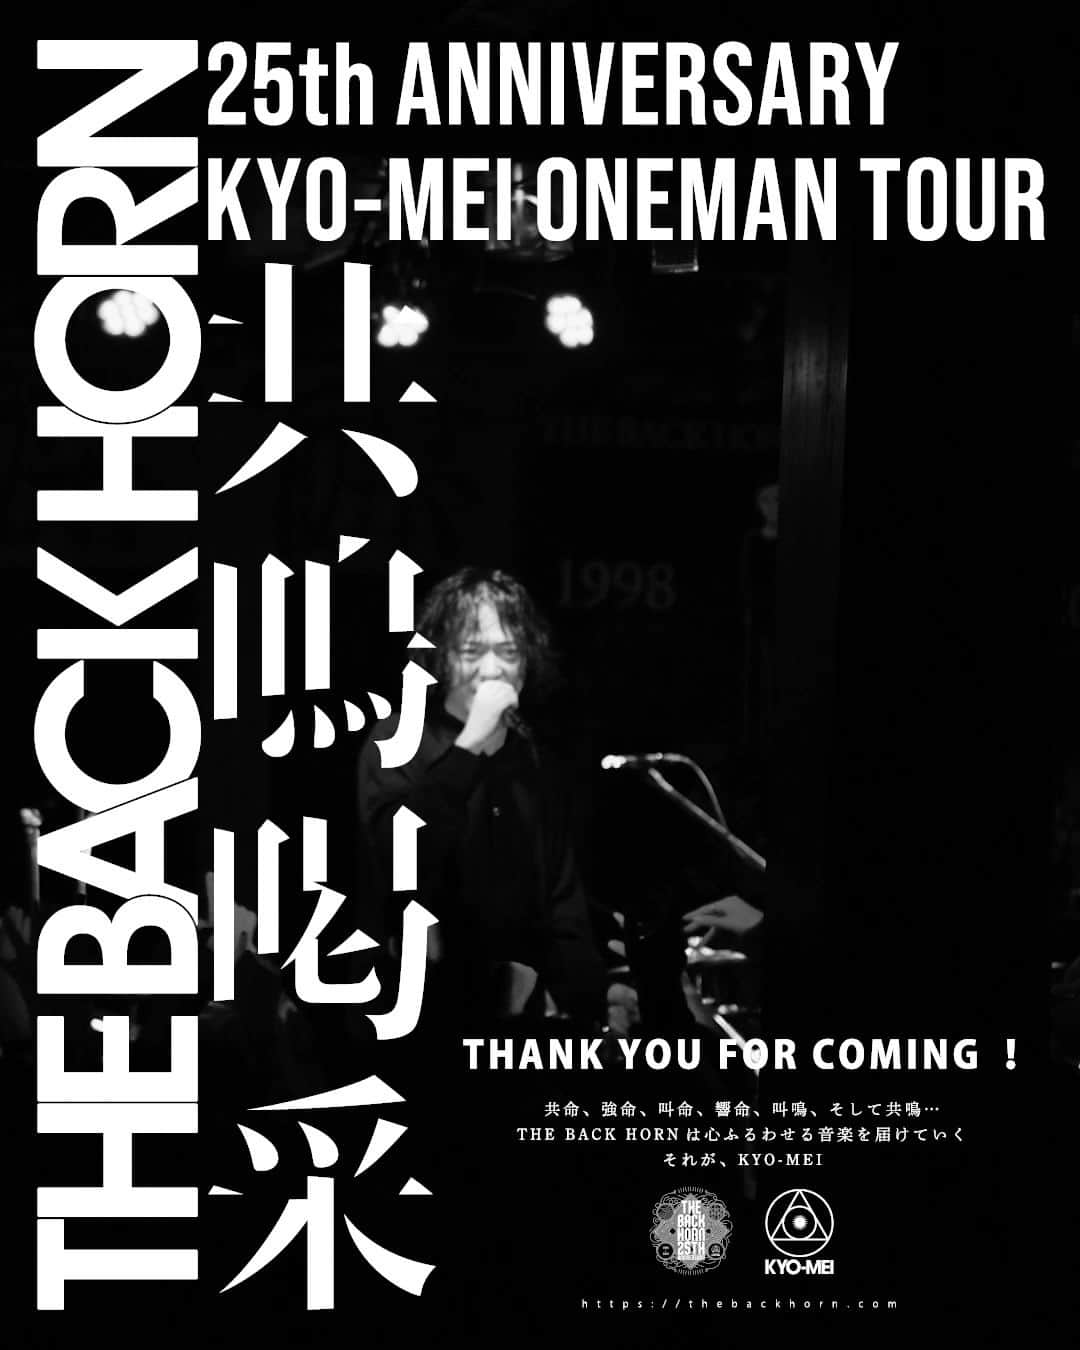 THE BACK HORNのインスタグラム：「「KYO-MEIワンマンツアー」〜共鳴喝采〜  🗓2023.10.29 sun 📍京都磔磔  THANK YOU FOR COMING‼️  NEXT... 11/12 名古屋DIAMOND HALL  ▼Ticket https://lnkfi.re/kyomei_kassai  #共鳴喝采 #TBH25th #THEBACKHORN #バックホーン #バクホン」